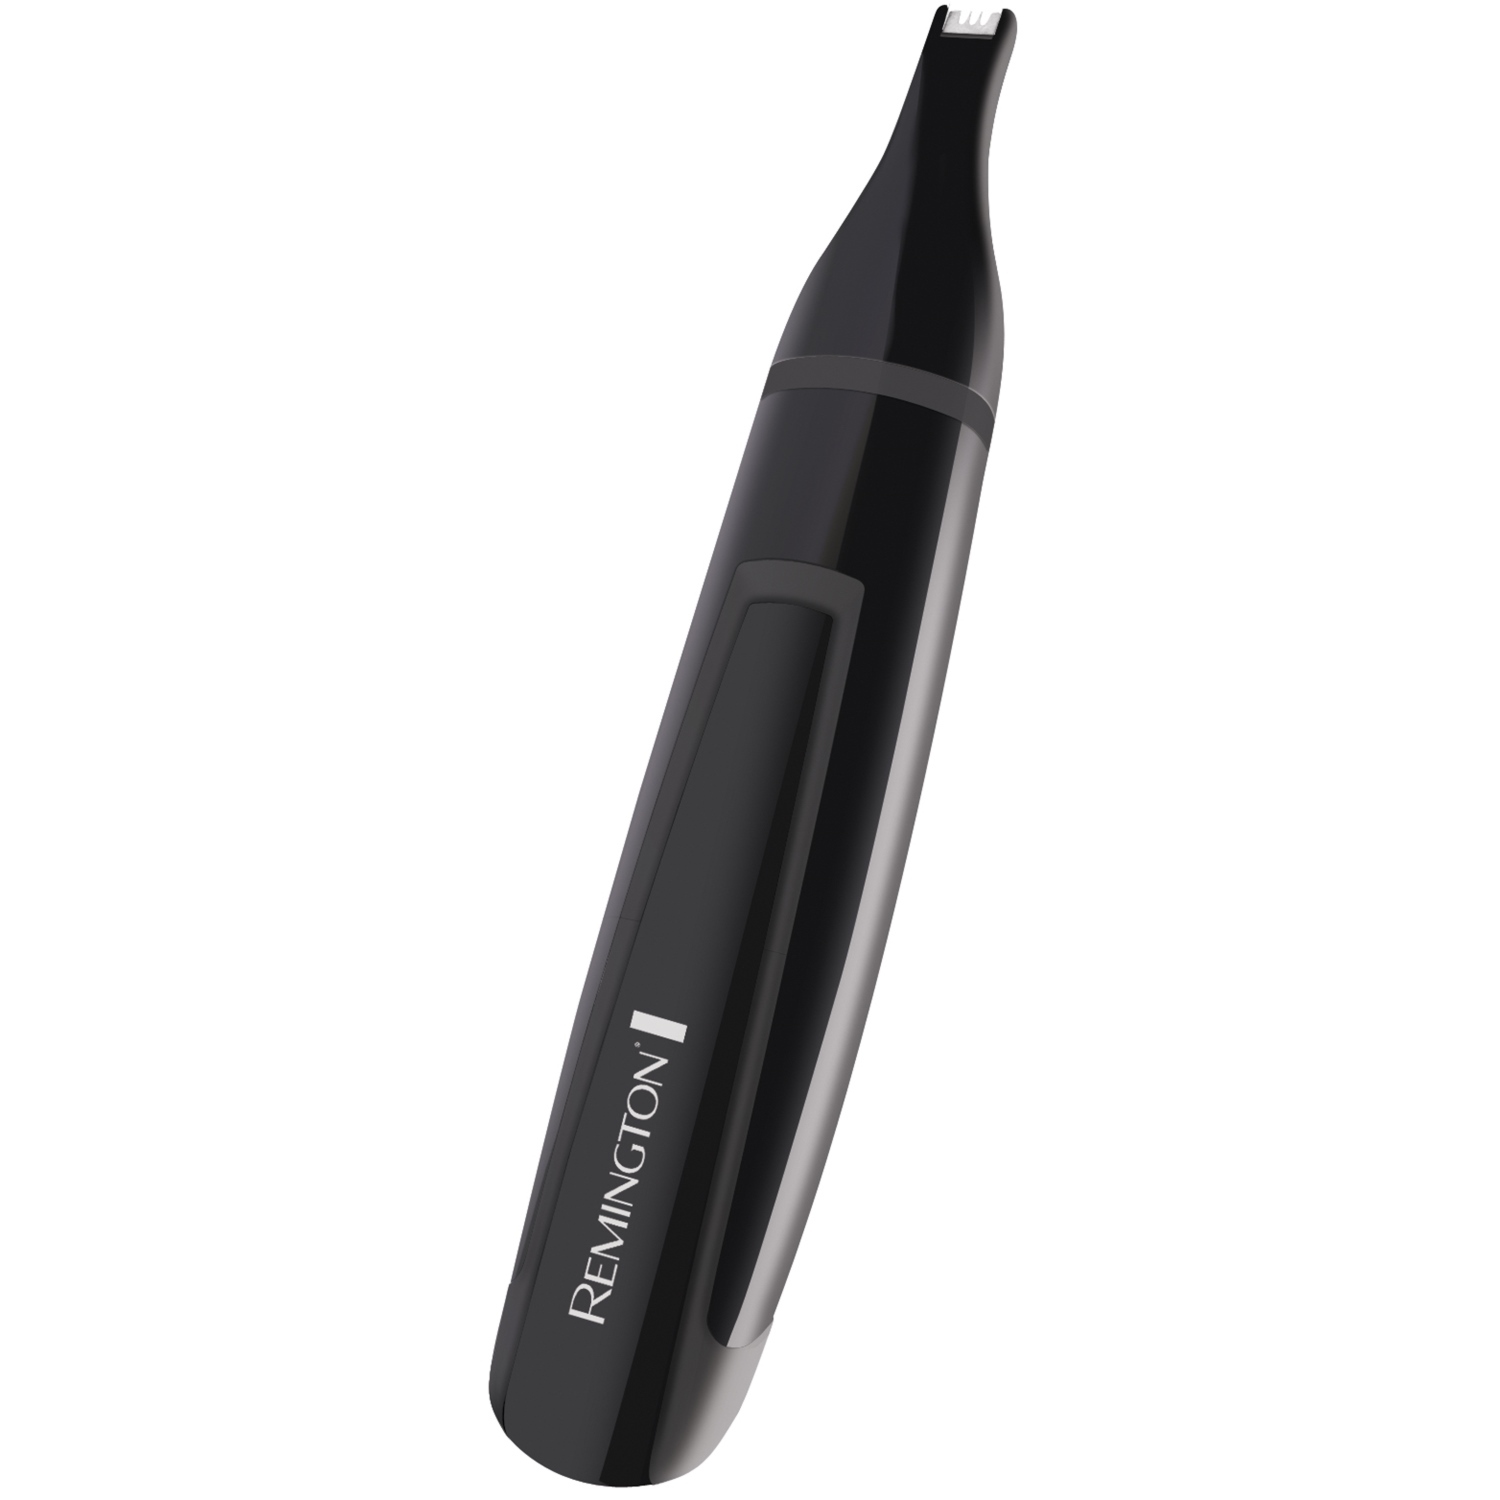 Remington Men's Smart Nose and Ear Hair Trimmer Image 2